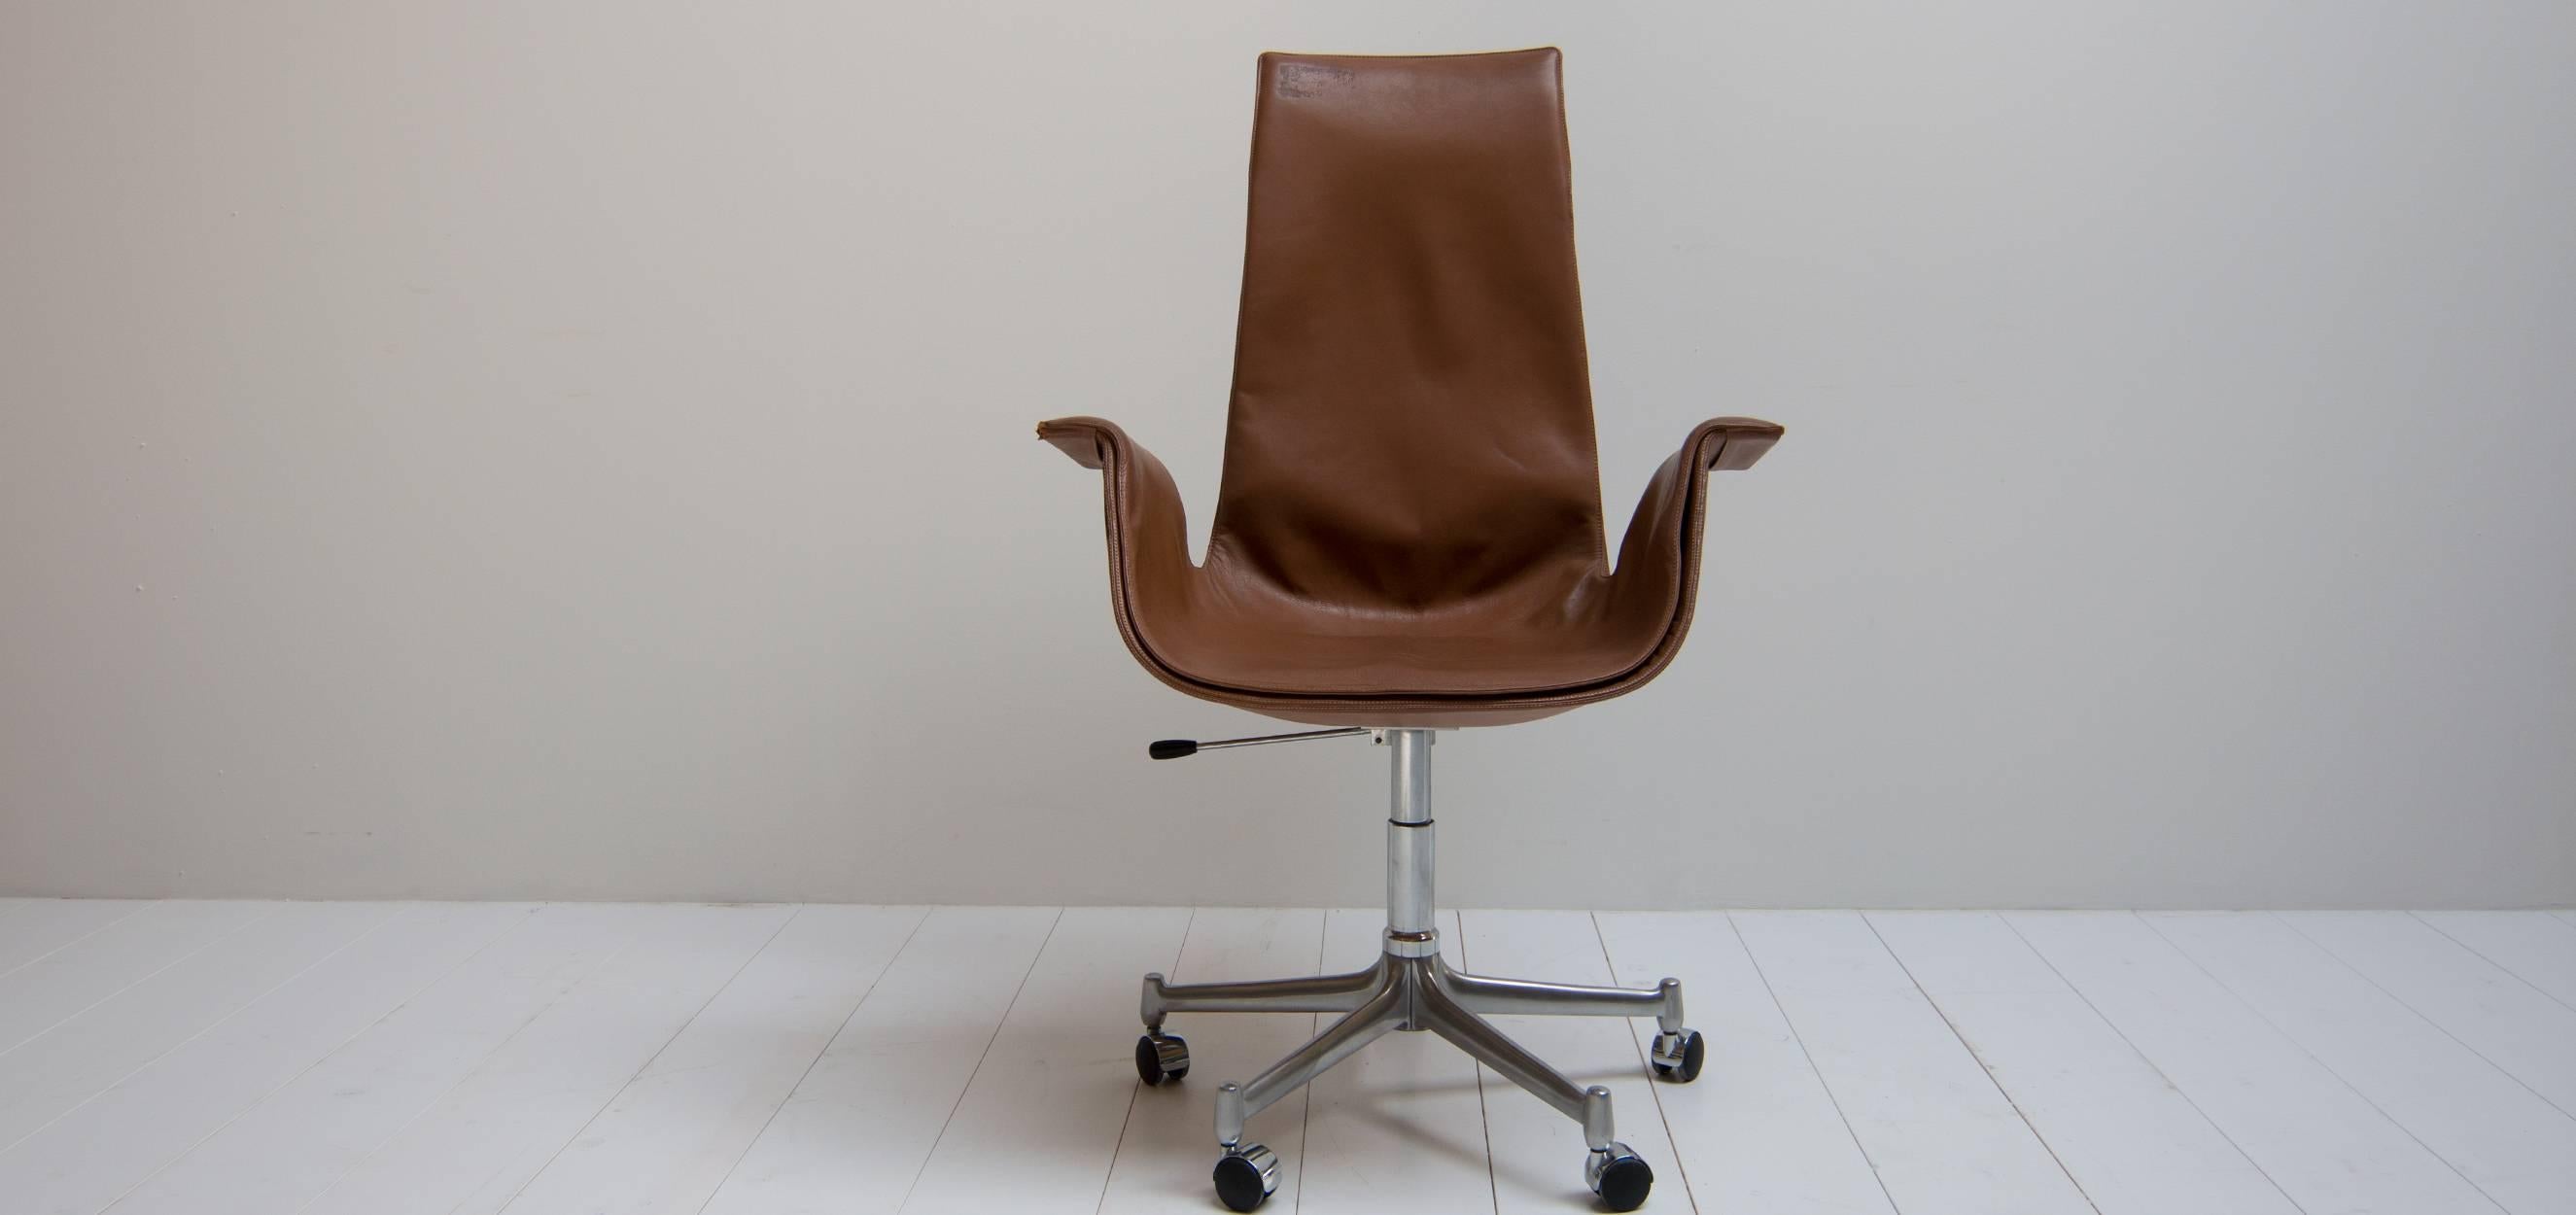 Jørgen Kastholm office chair, model FK 6725, was produced by Kill International in 1960. The chair was designed by Preben Fabricius and Jørgen Kastholm.

Jørgen Kastholm office chair
The office chair is lined with beautiful brown leather and